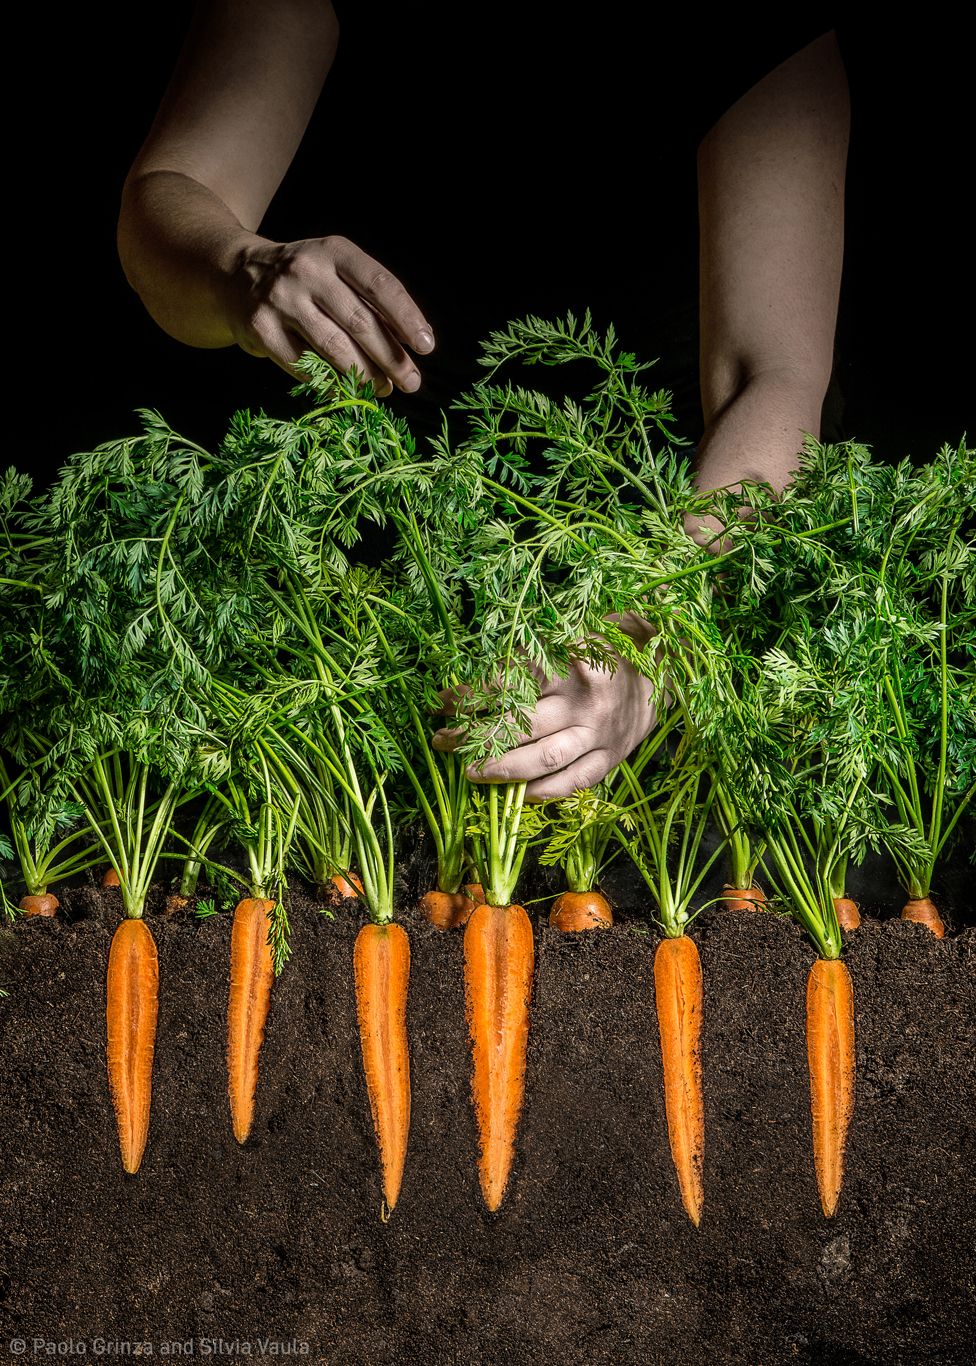 Carrots sliced vertically sit in soil, with hands holding their leaves